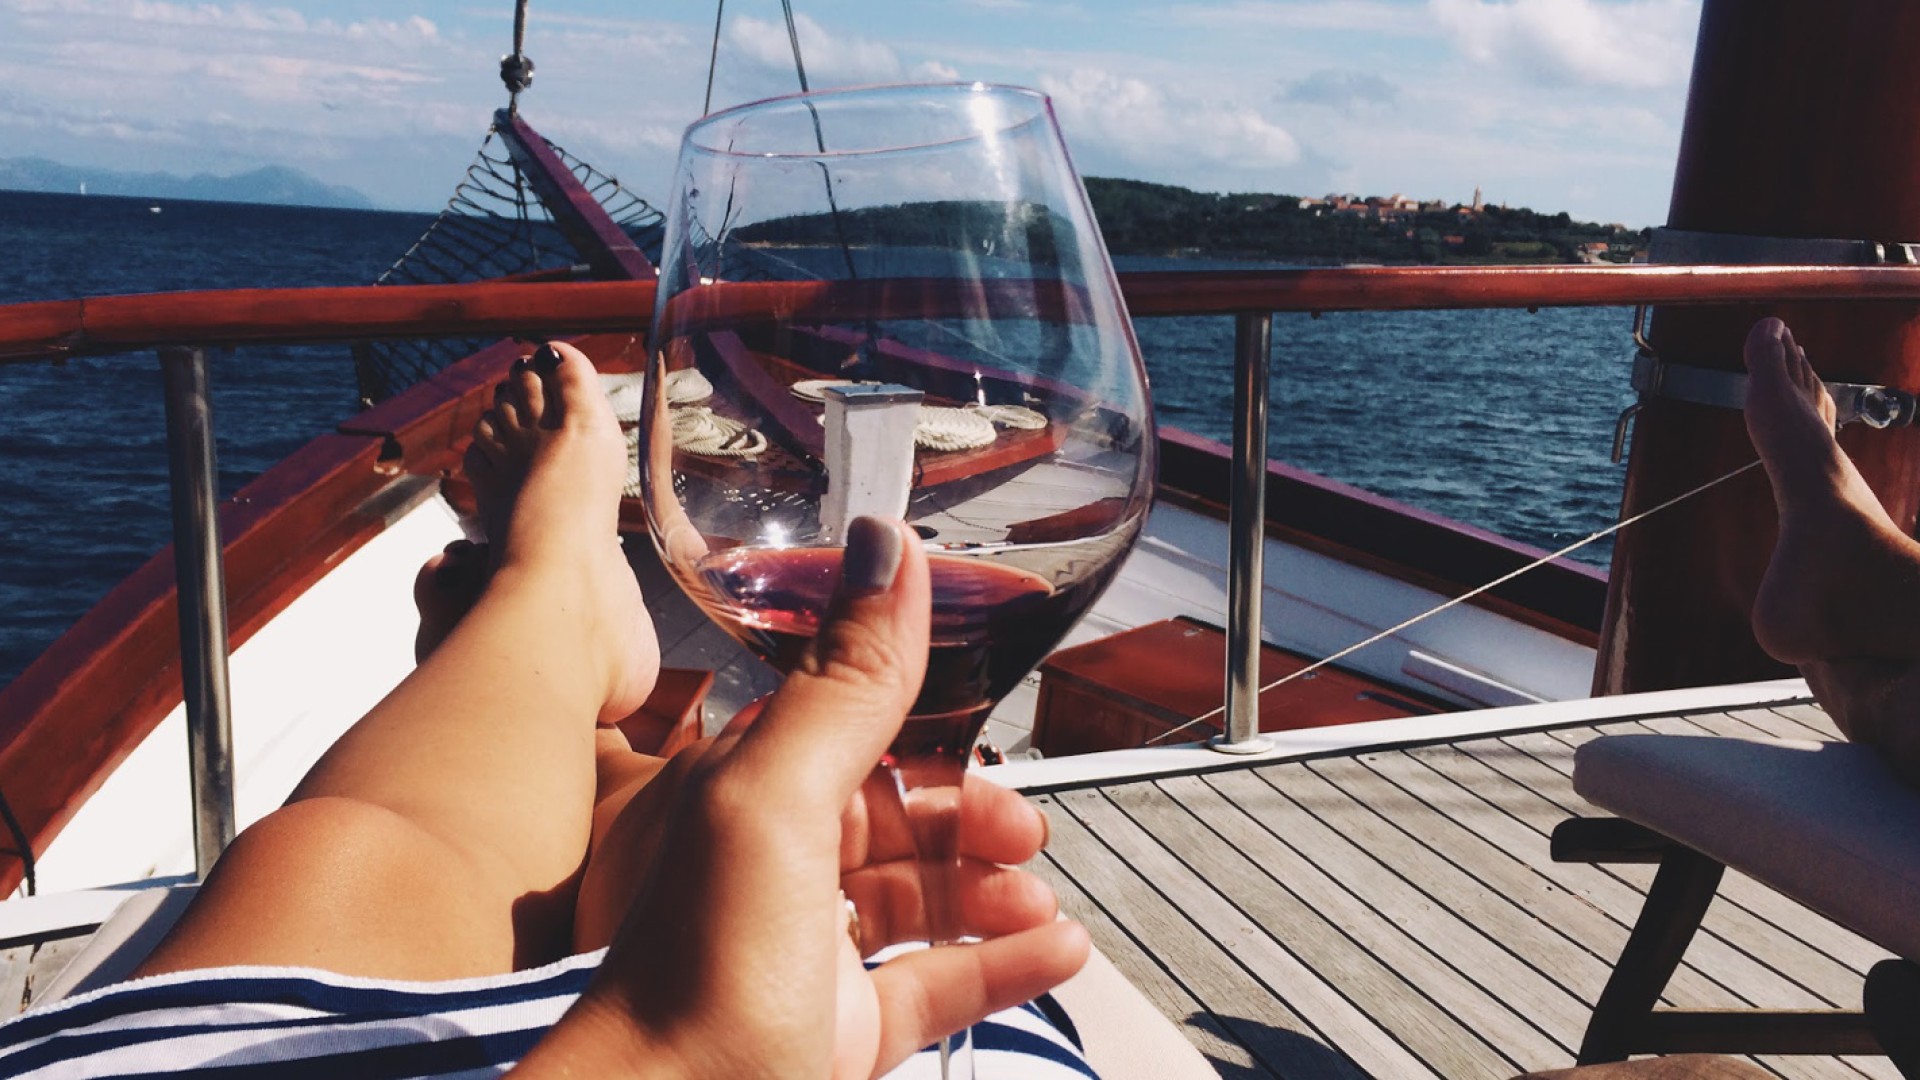 Person reaching out their glass of red wine to cheers while cruising on a small yacht in Croatia on the Mediterranean Sea